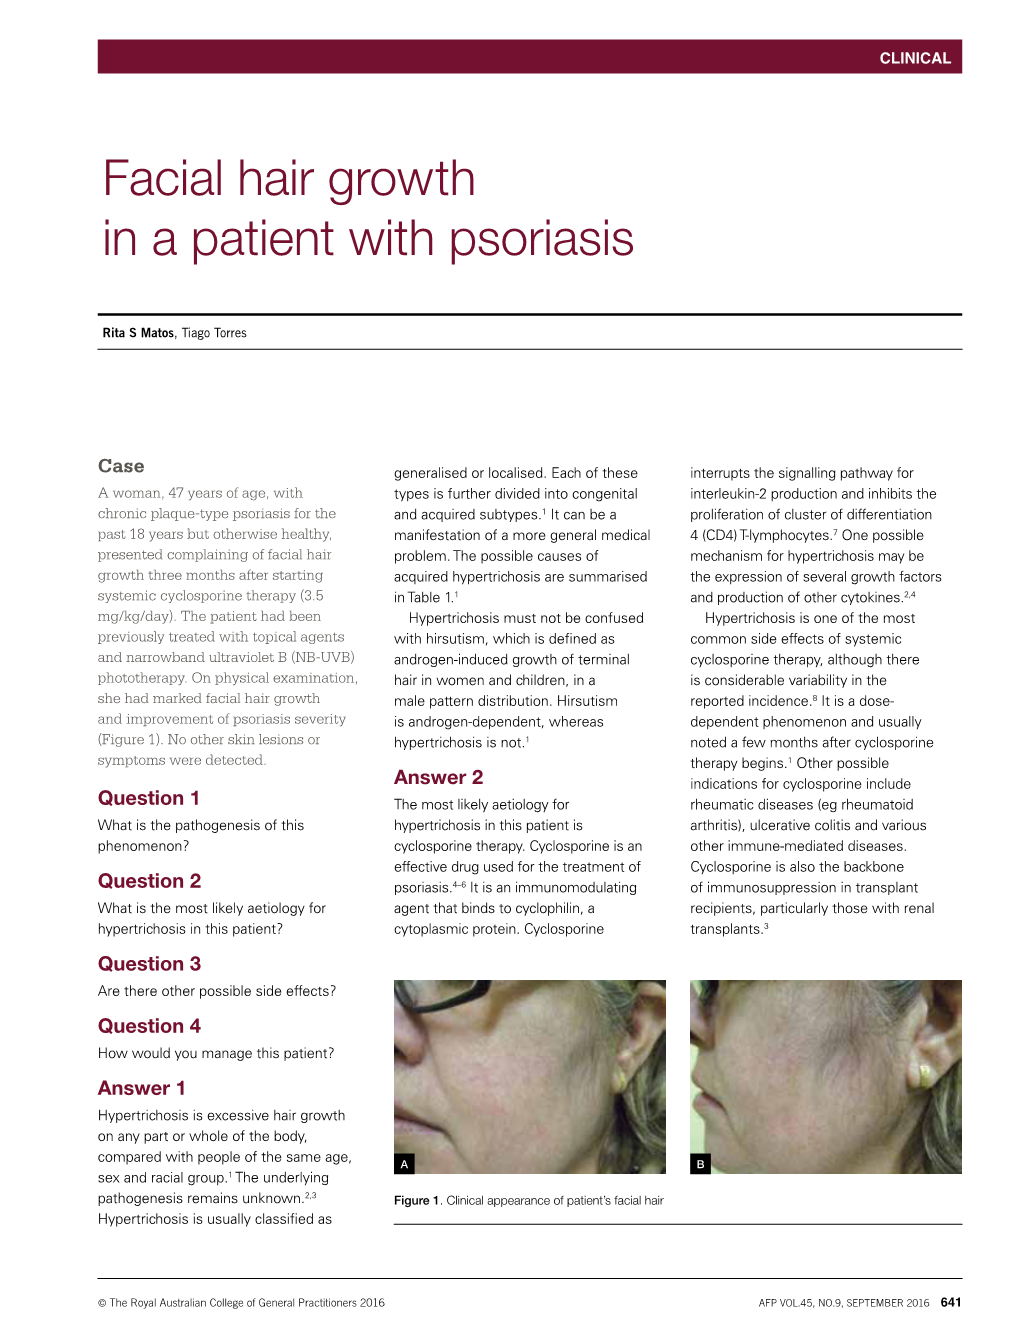 Facial Hair Growth in a Patient with Psoriasis